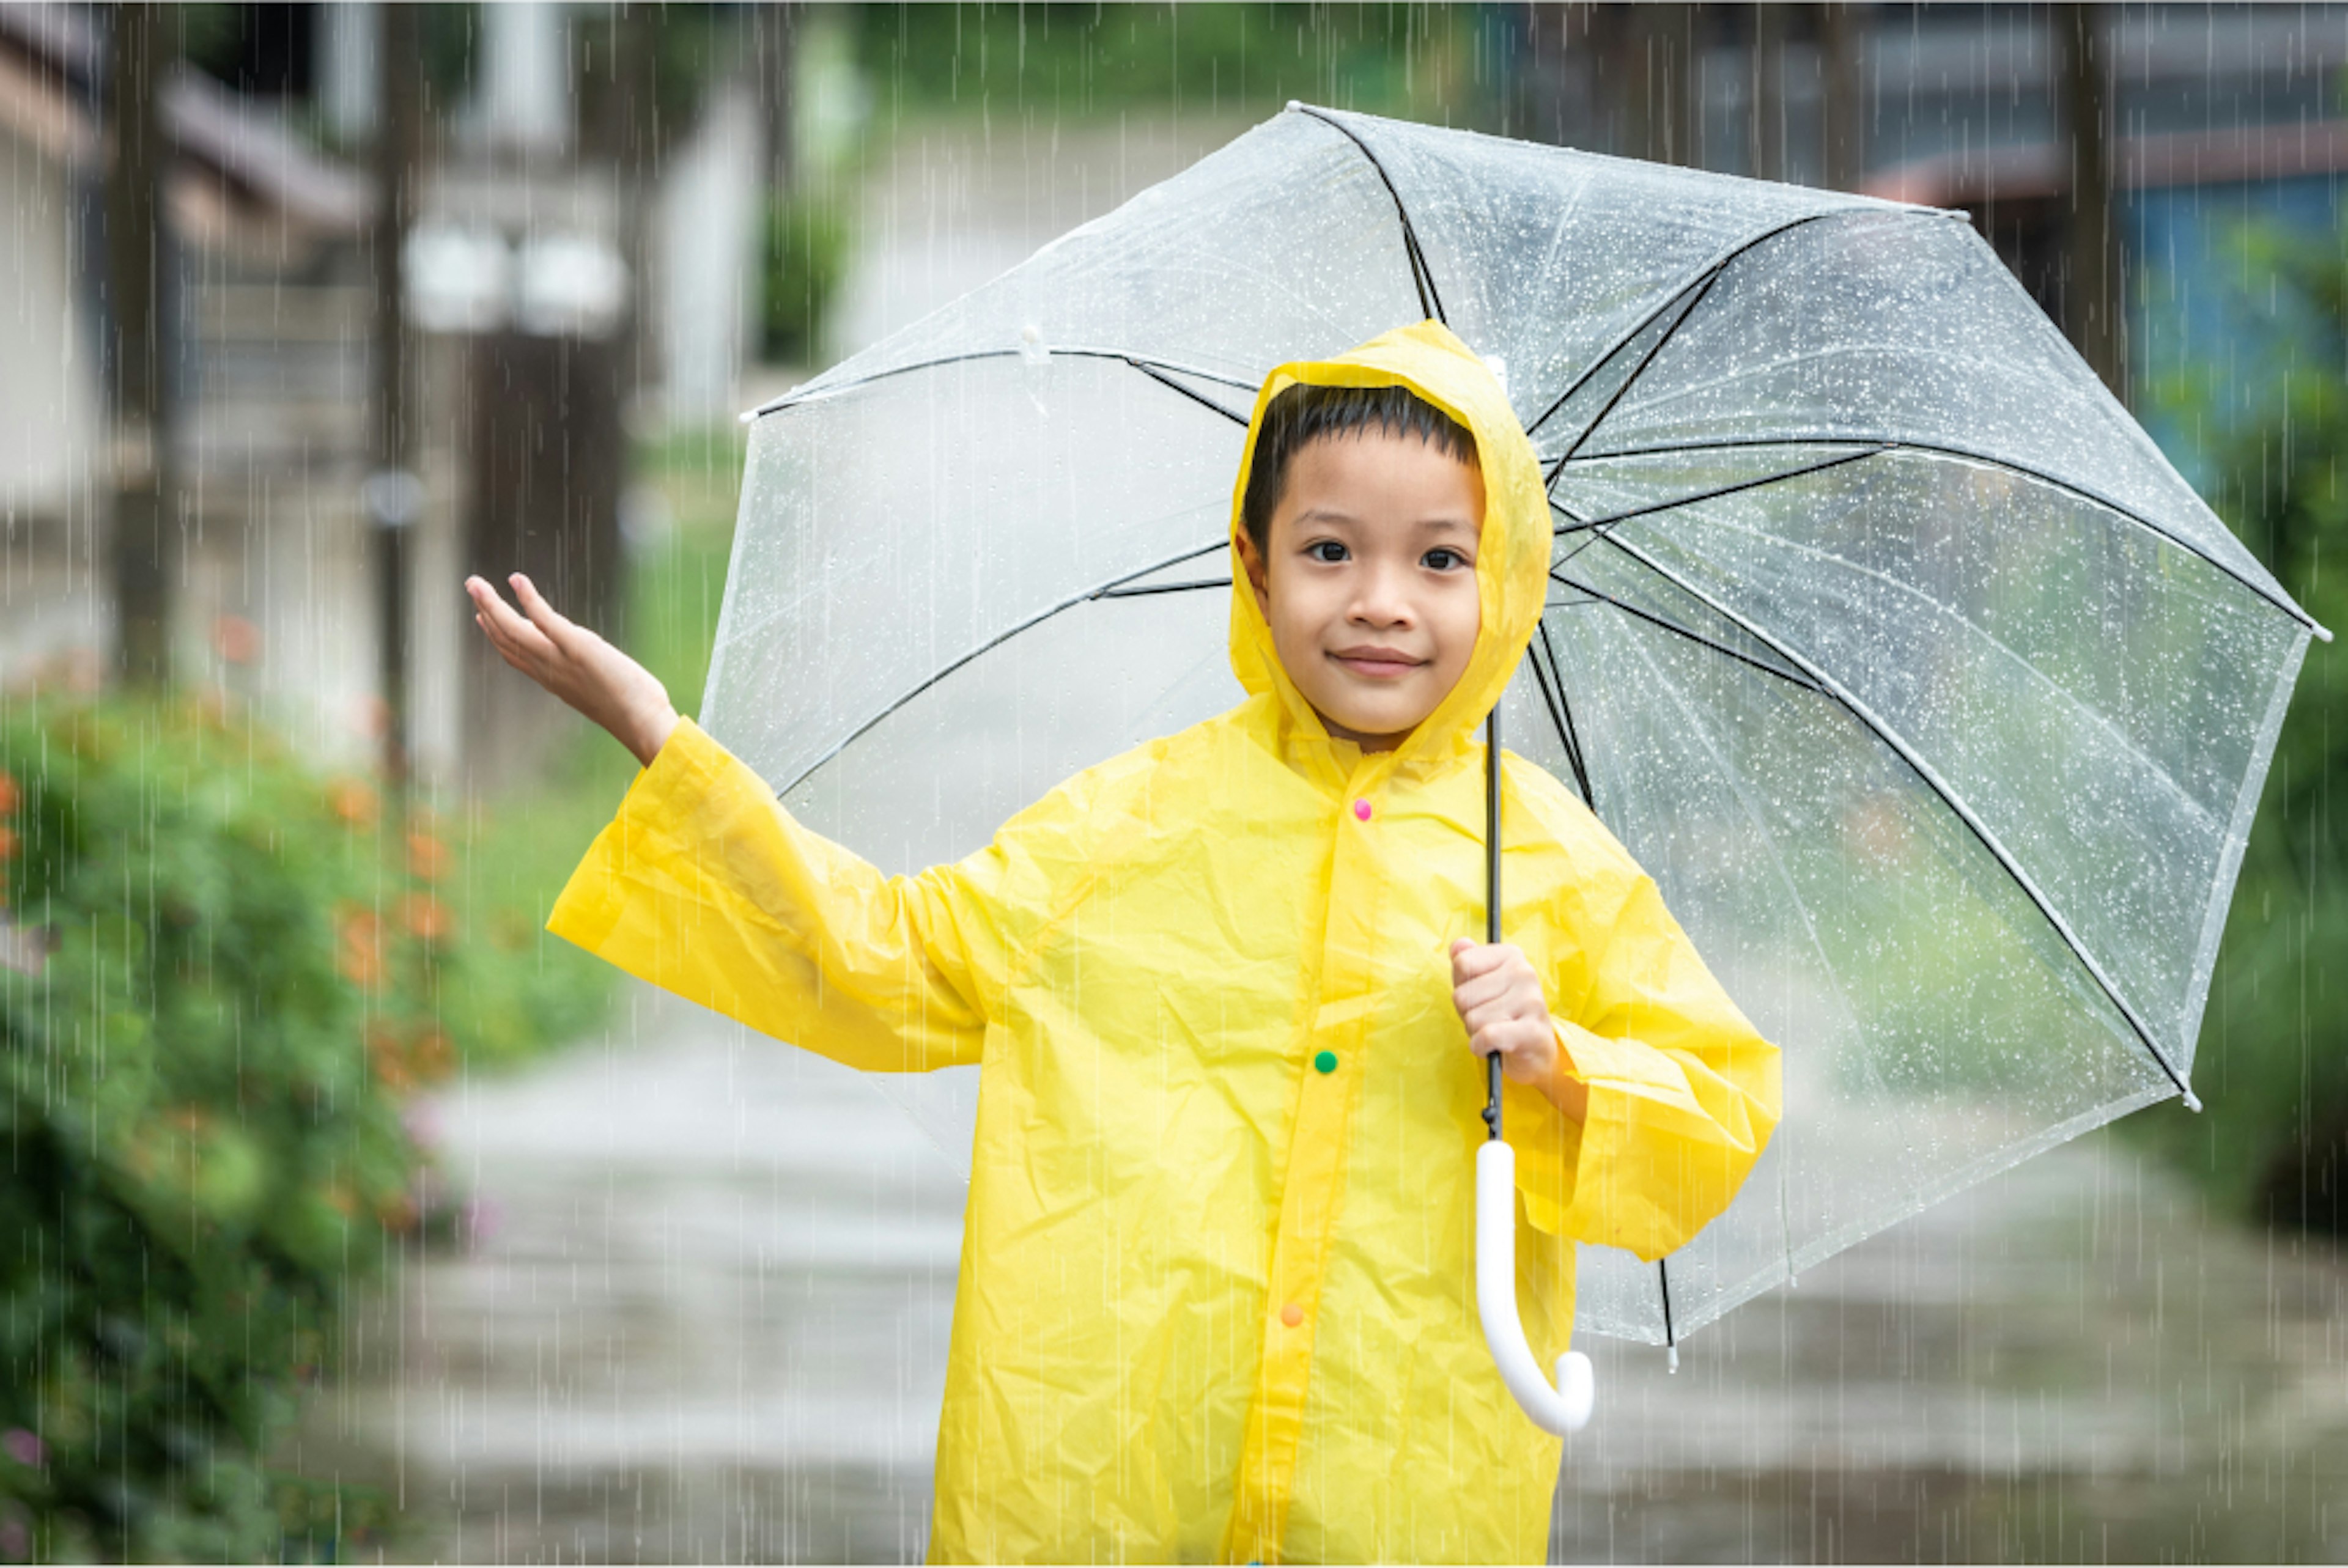 Kid Connects Tile: Kid in yellow raincoat holding a clear umbrella in the rain.